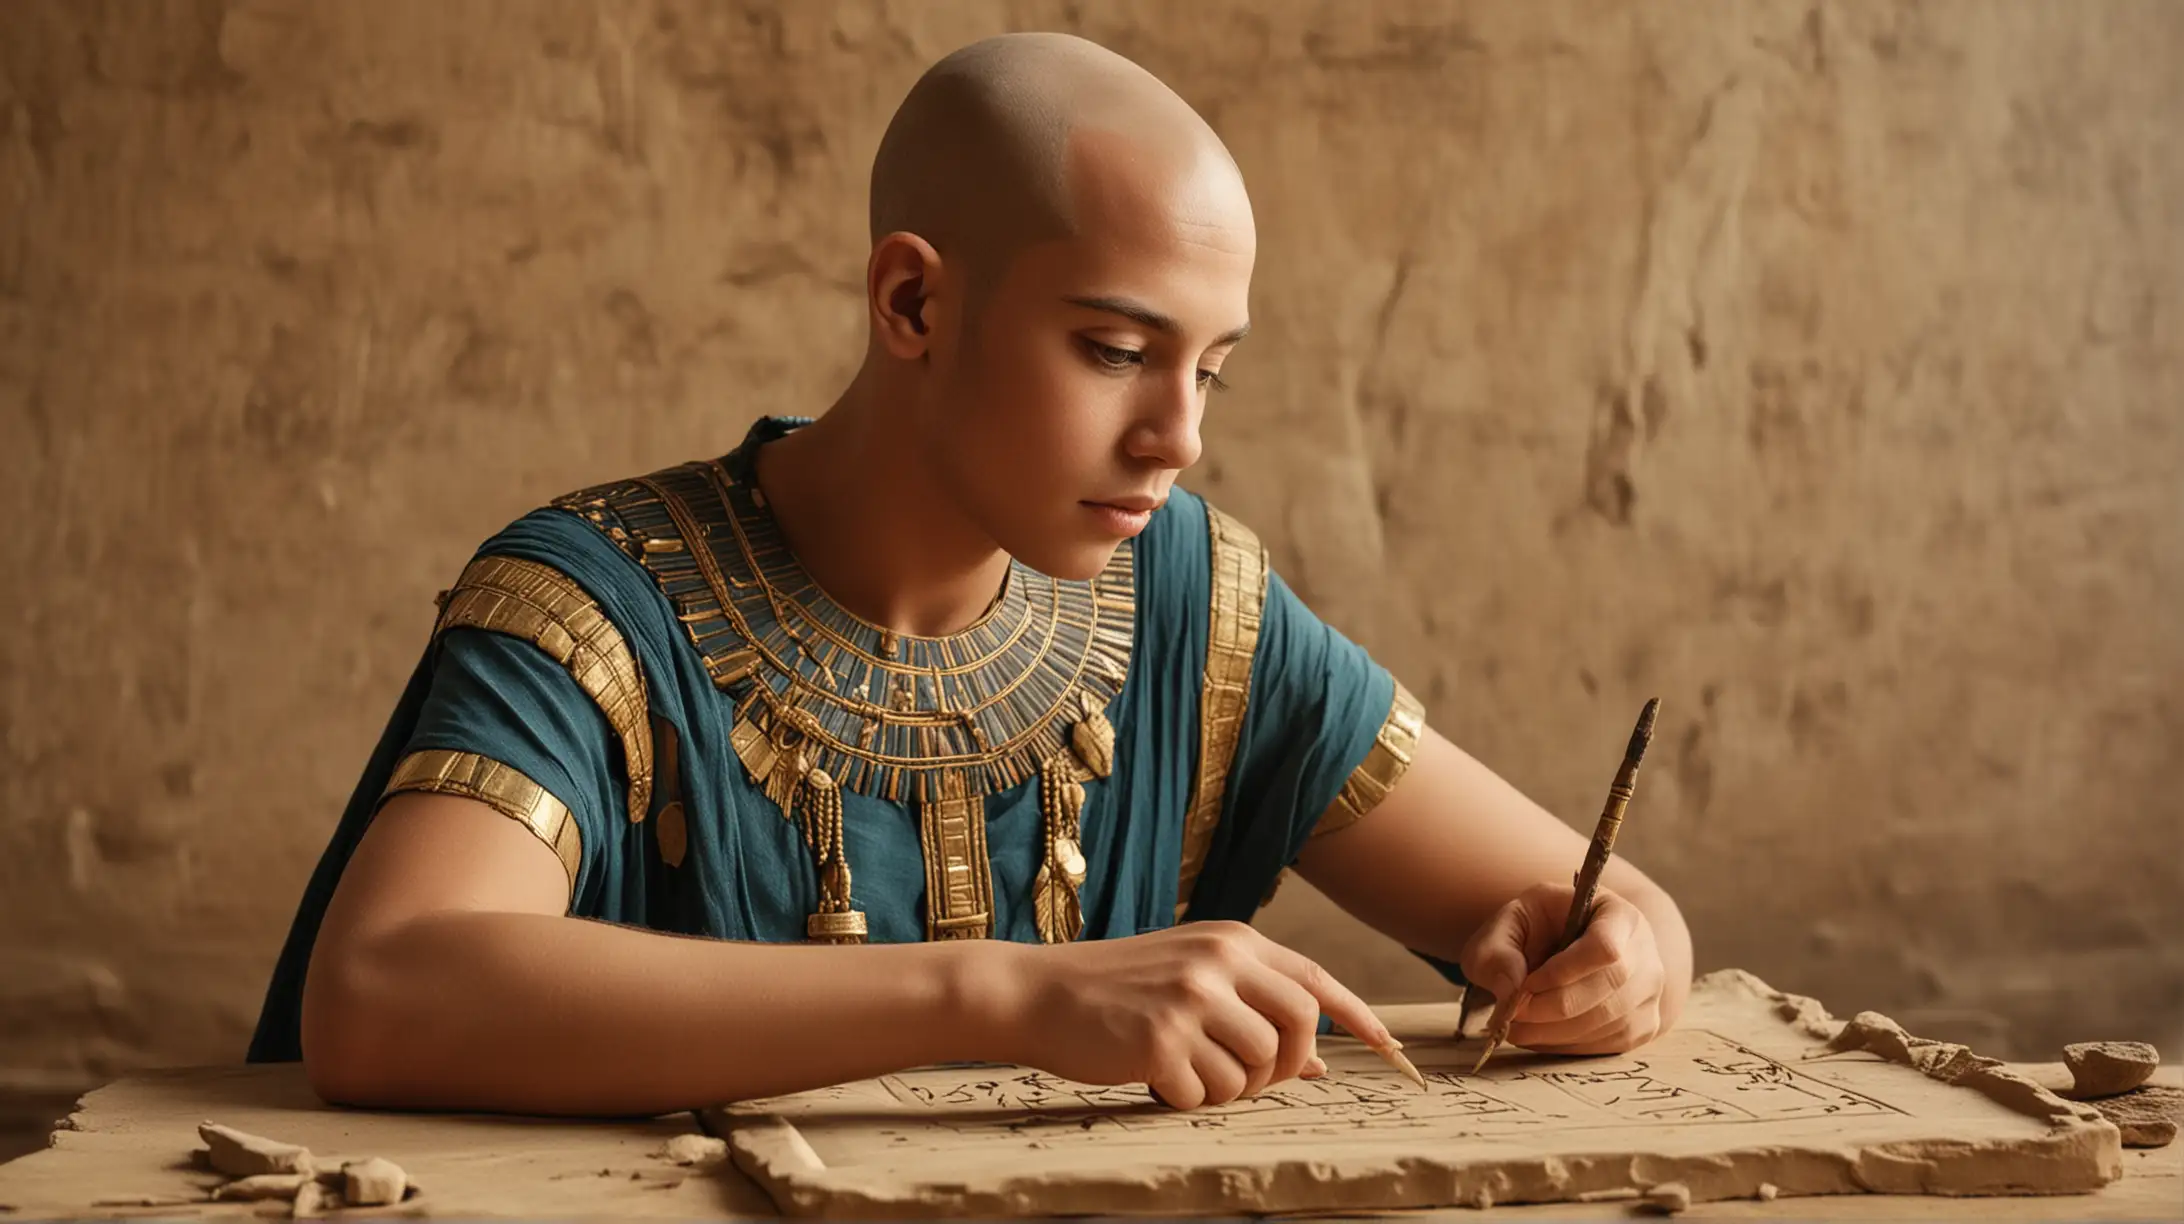 Ancient Egyptian Prince Learning to Write on Clay Tablet